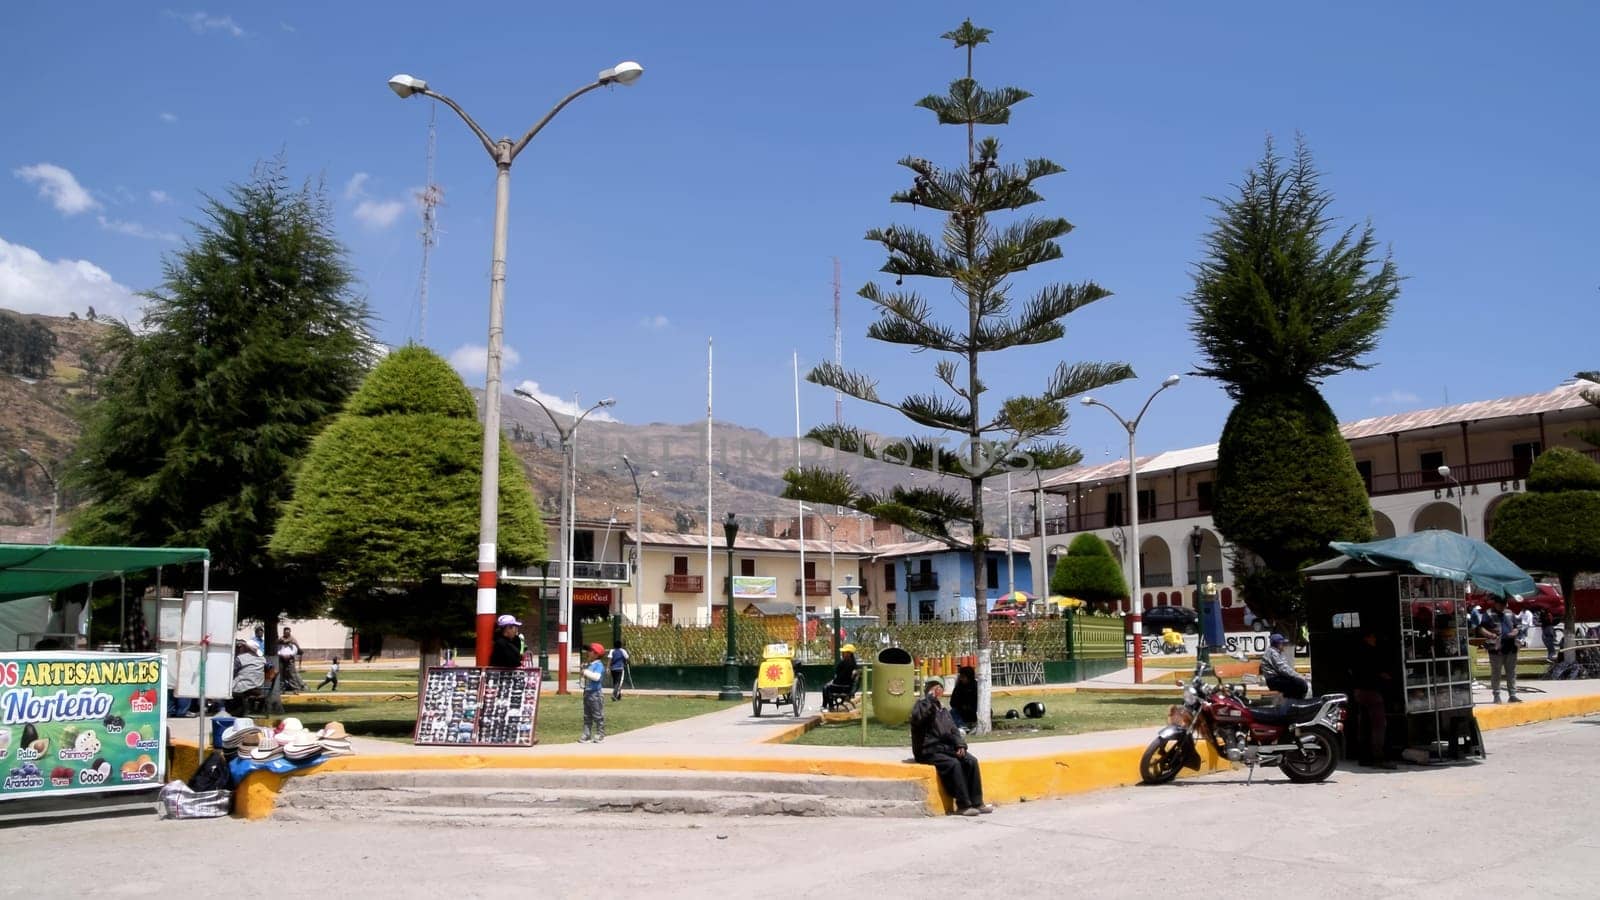 Lima, Peru - September 7, 2019 : Peaceful central park in a small town with locals enjoying a bright day, city of Canta located north of Lima - Peru